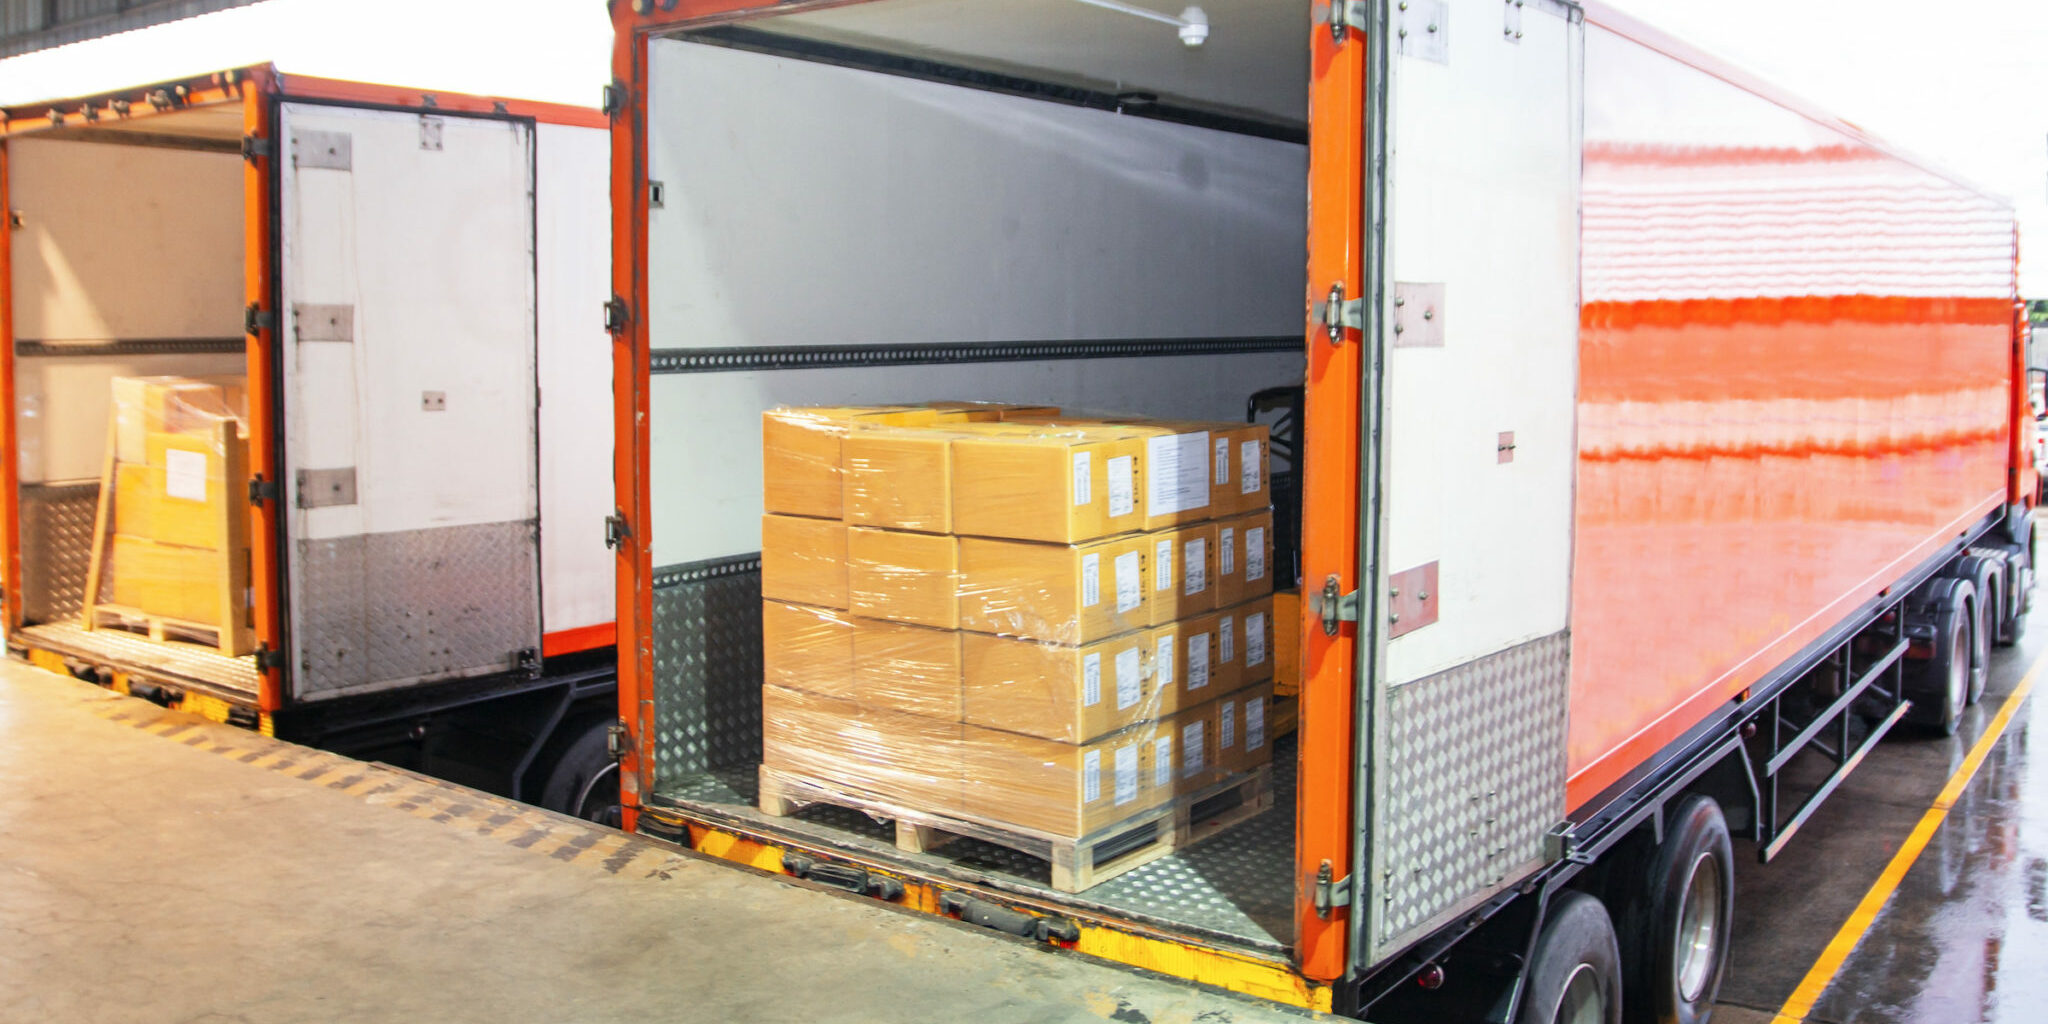 Package Boxes Load with Cargo Container. Trailer Truck Parked Loading at Dock Warehouse. Delivery Service. Shipping Warehouse Logistics. Cargo Shipment Boxes. Freight Truck Transportation.